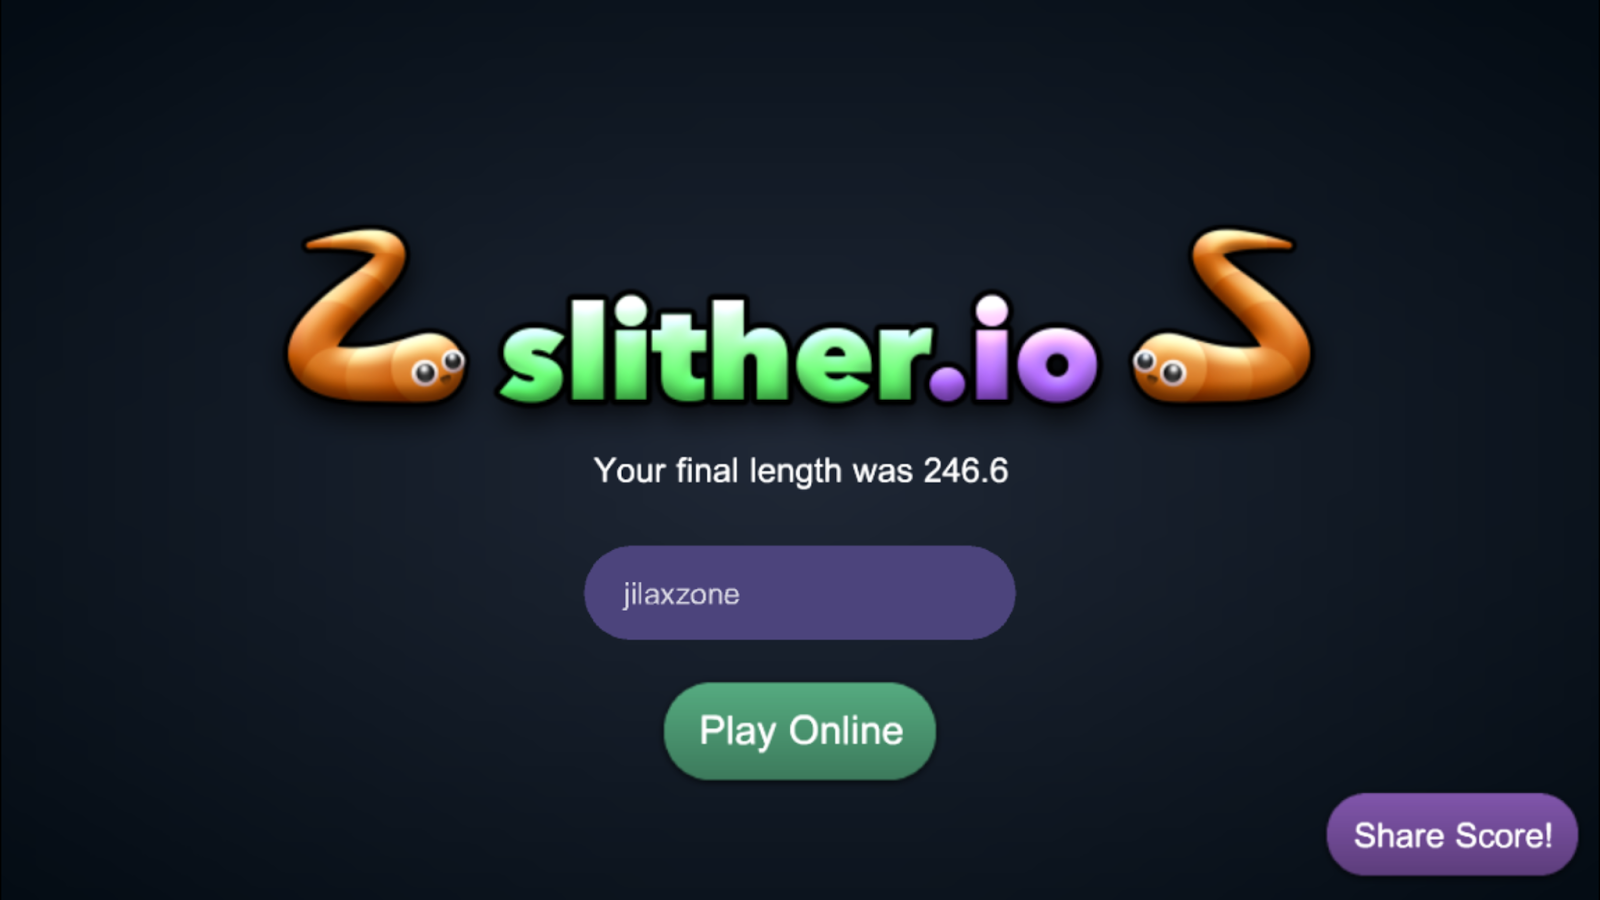 FREE IPHONE / IPAD / IOS APPS and GAMES Daily: [FREE iPHONE GAME] Slither.io ...